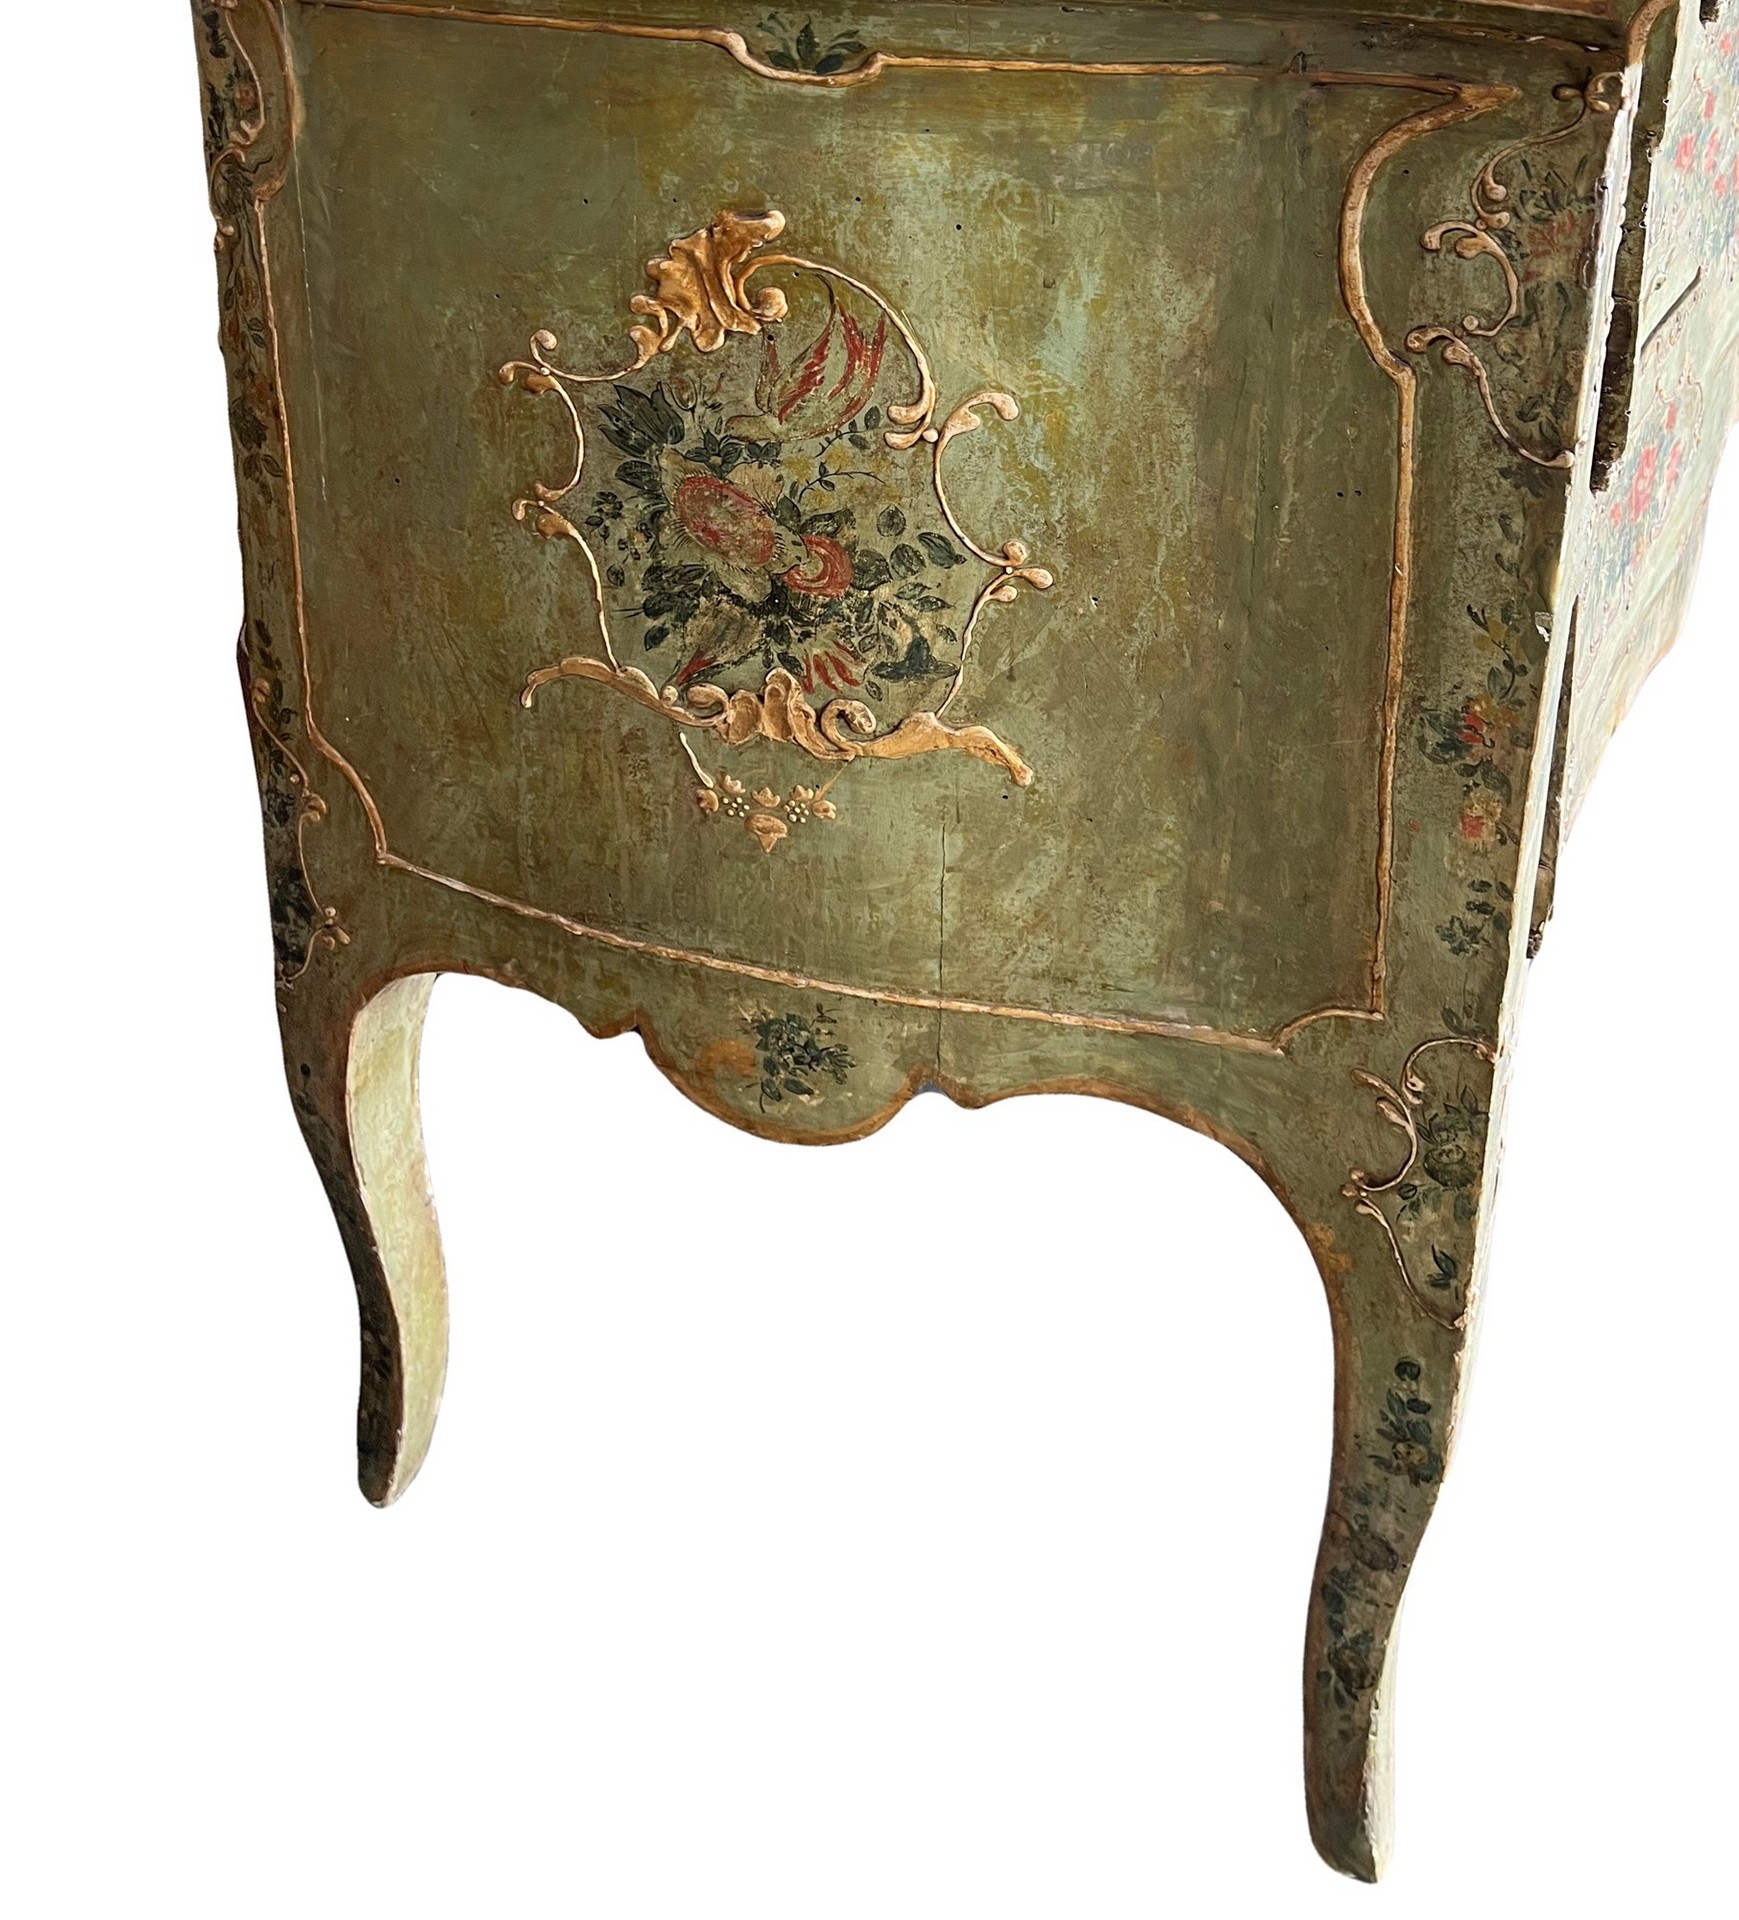 Lacquered chest of drawers, Marche, XVIII century - Image 3 of 3